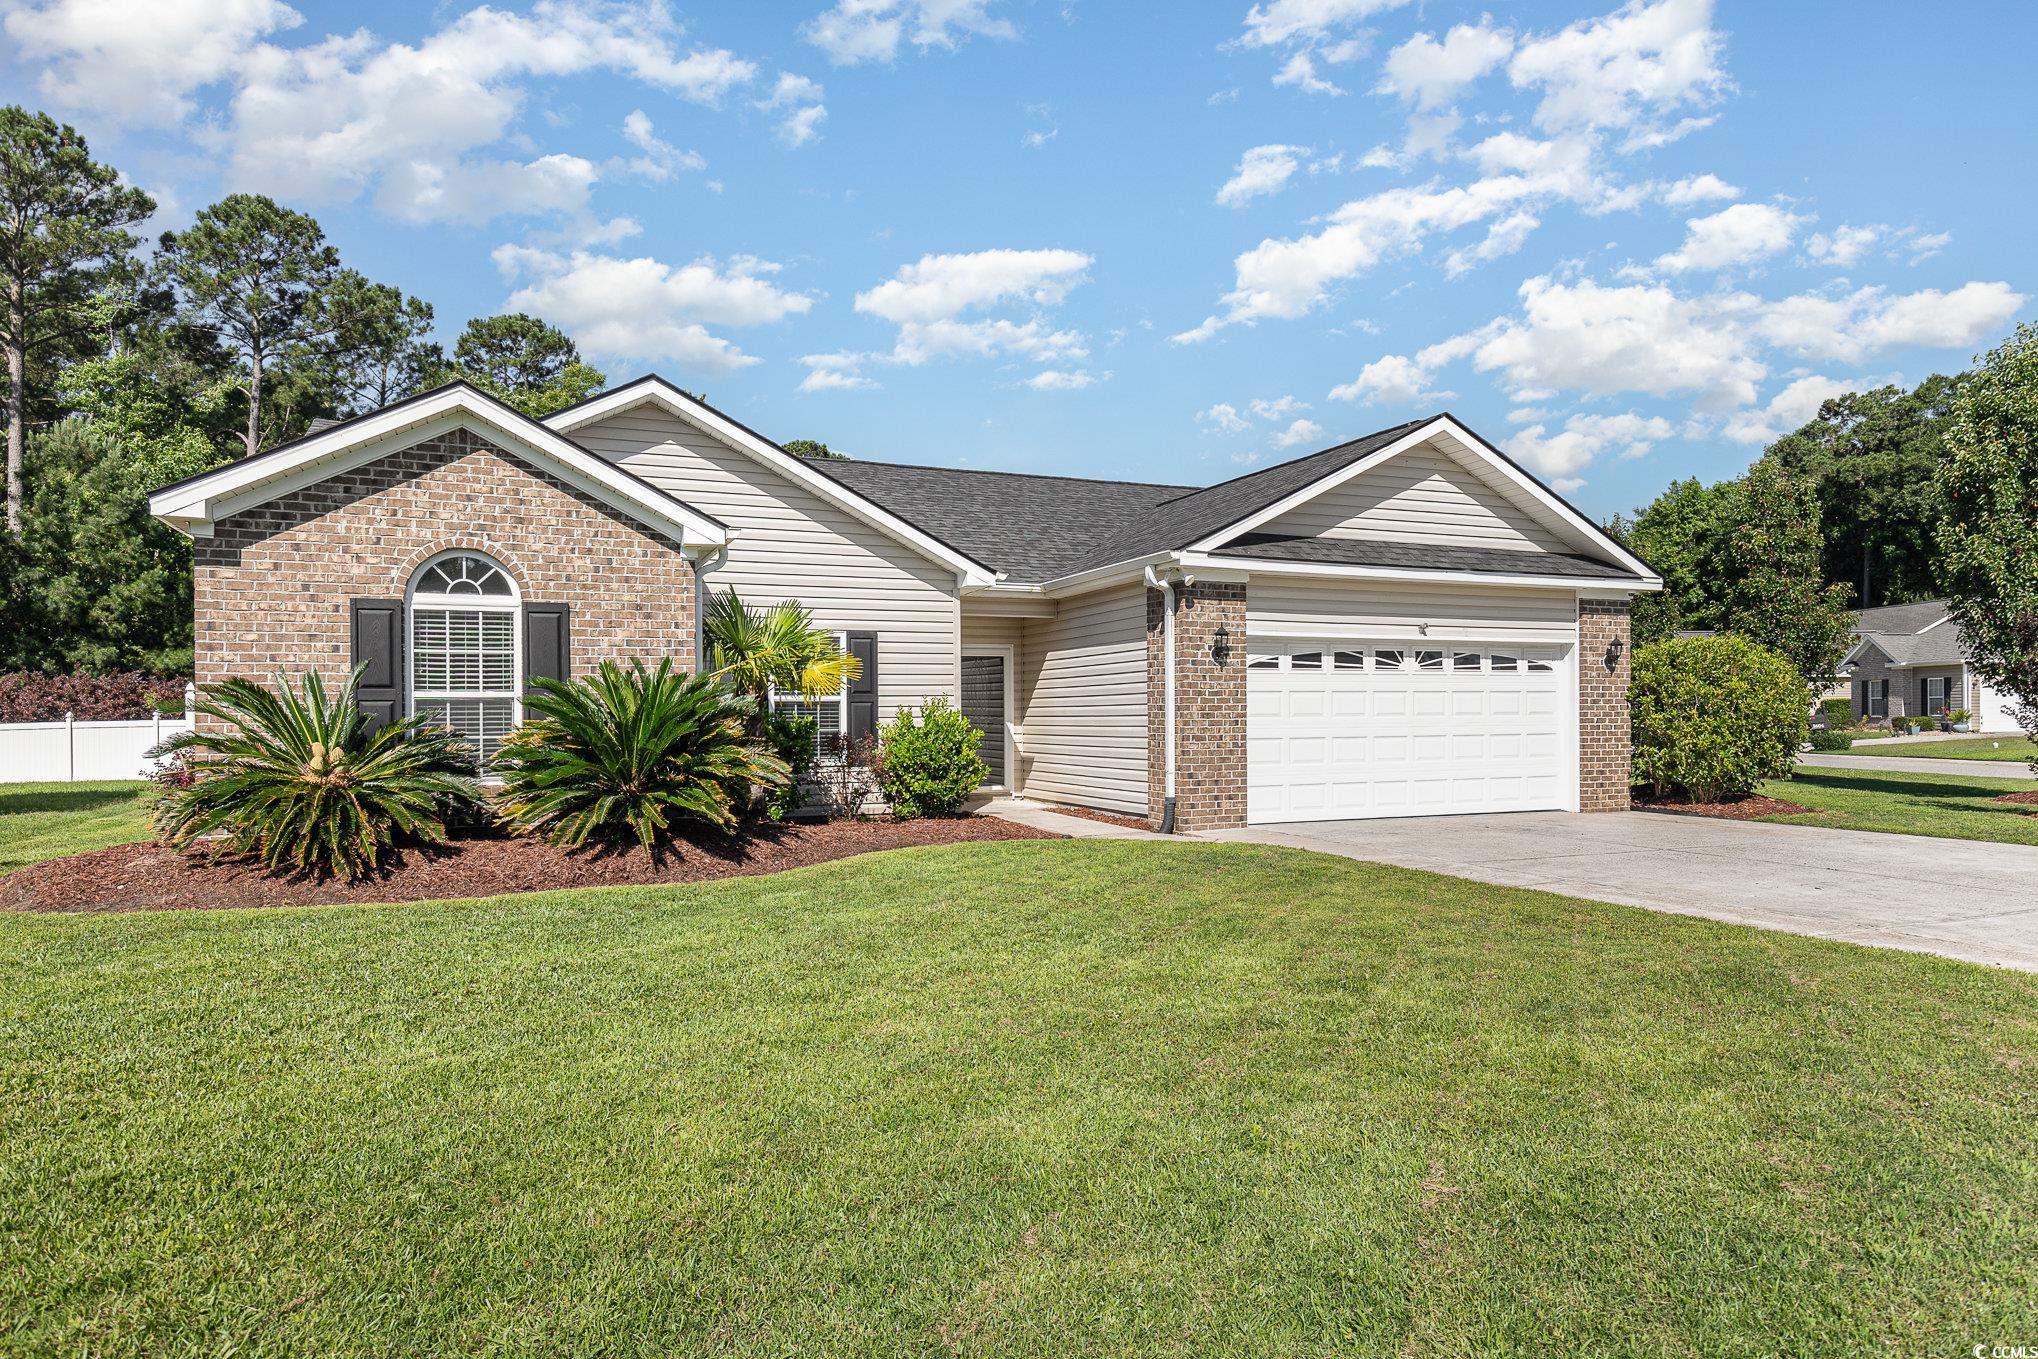 232 Colby Ct. Myrtle Beach, SC 29588